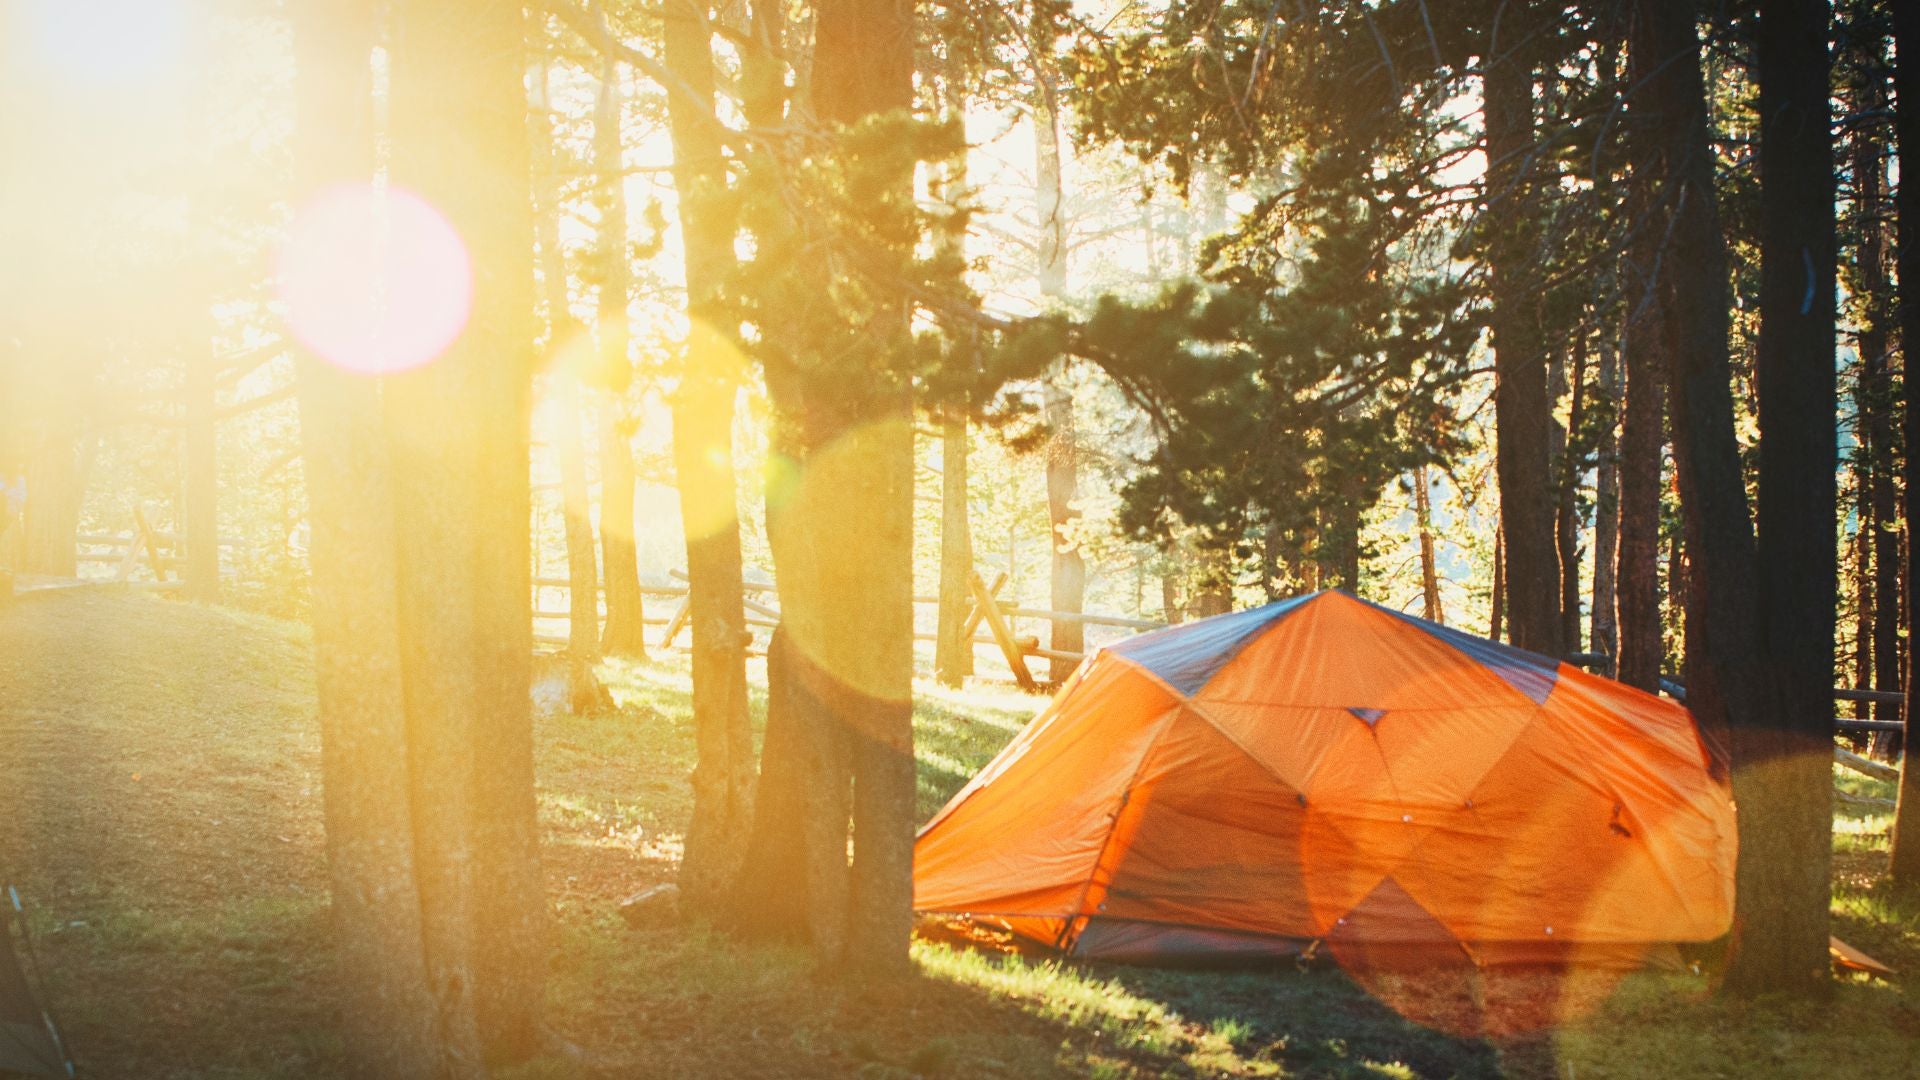 Recommendation: Celebrating national camping month in nature!